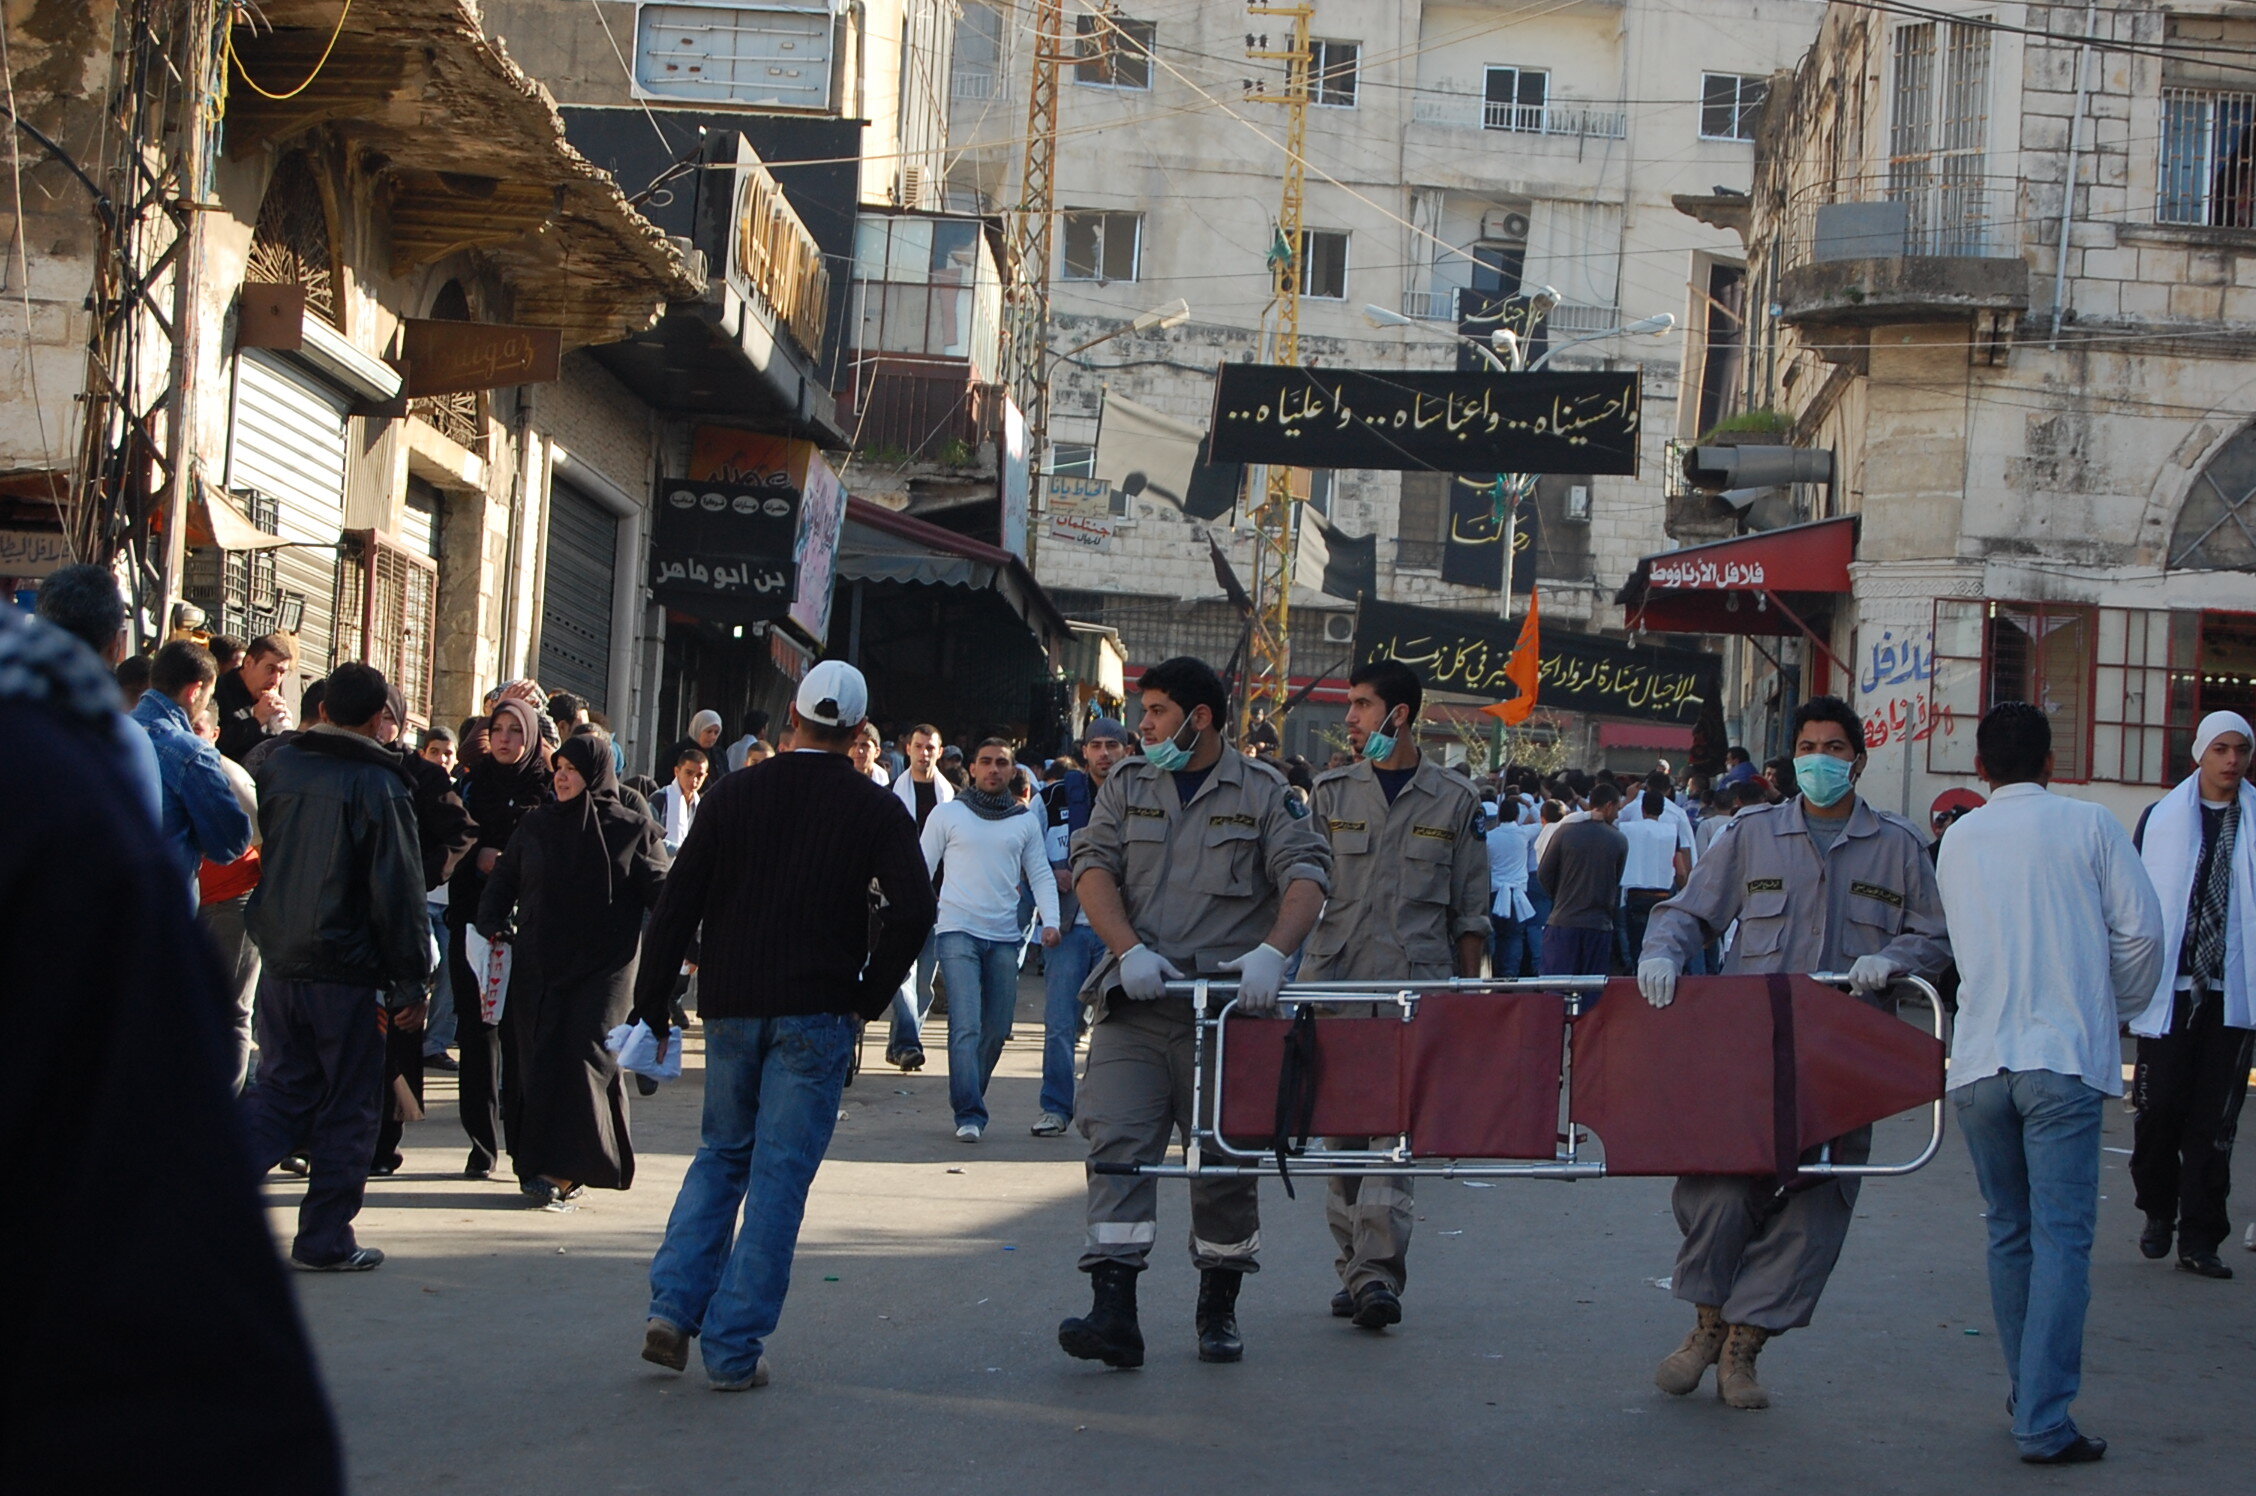  medical vans were parked around the square to tend to those who would lose consciousness. Nabatiyeh, south Lebanon, 2008 